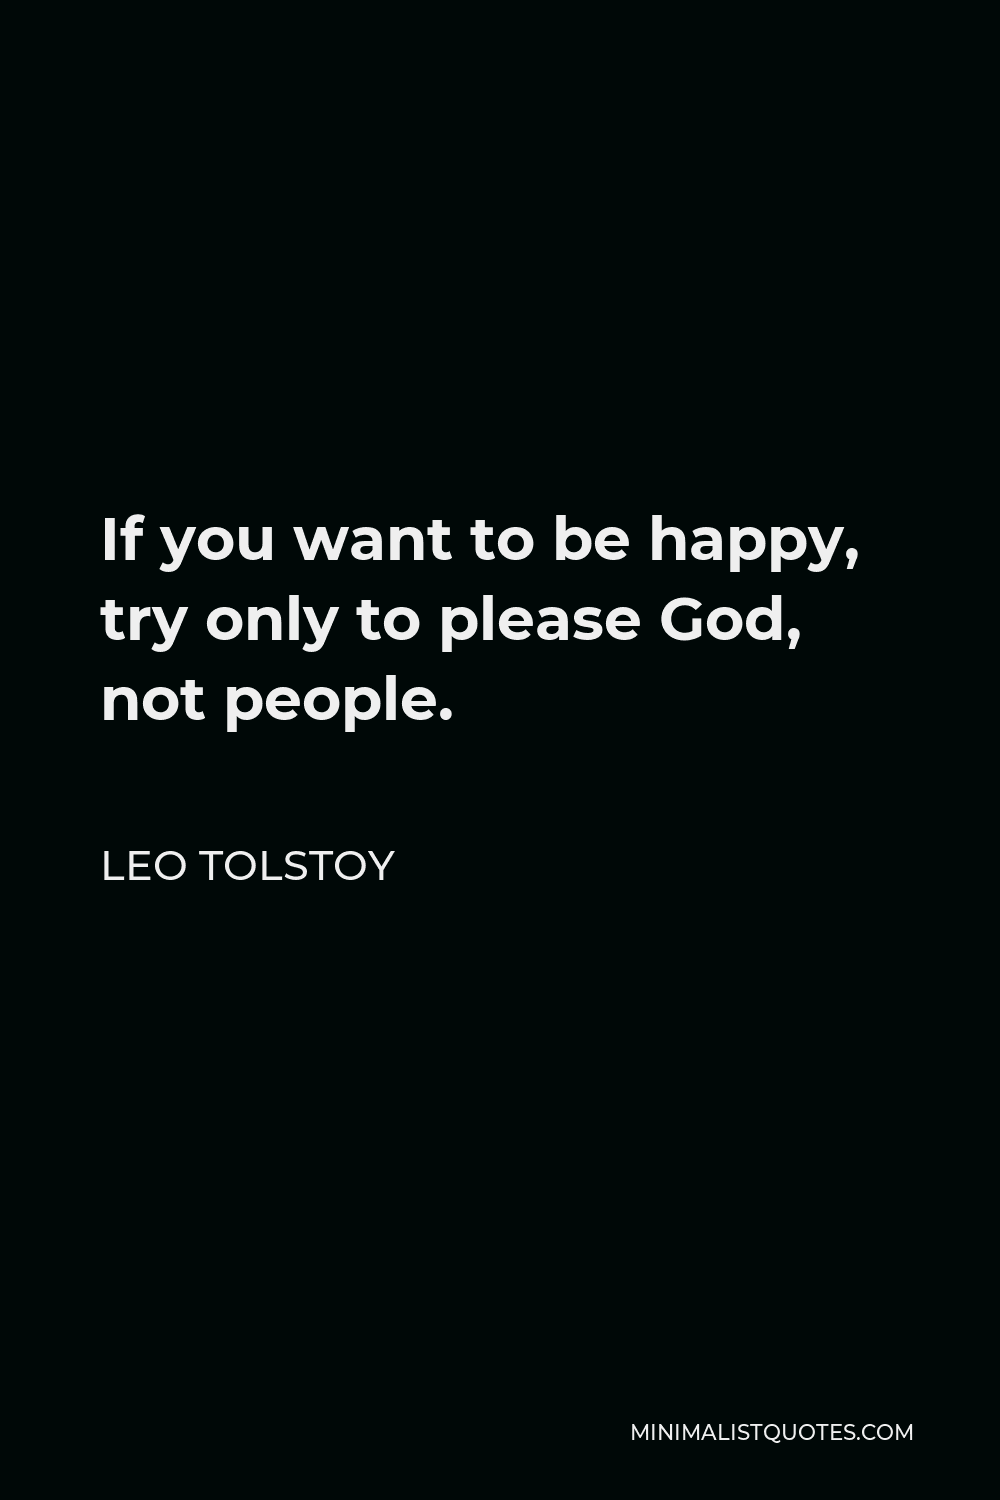 Leo Tolstoy Quote If You Want To Be Happy Try Only To Please God Not People